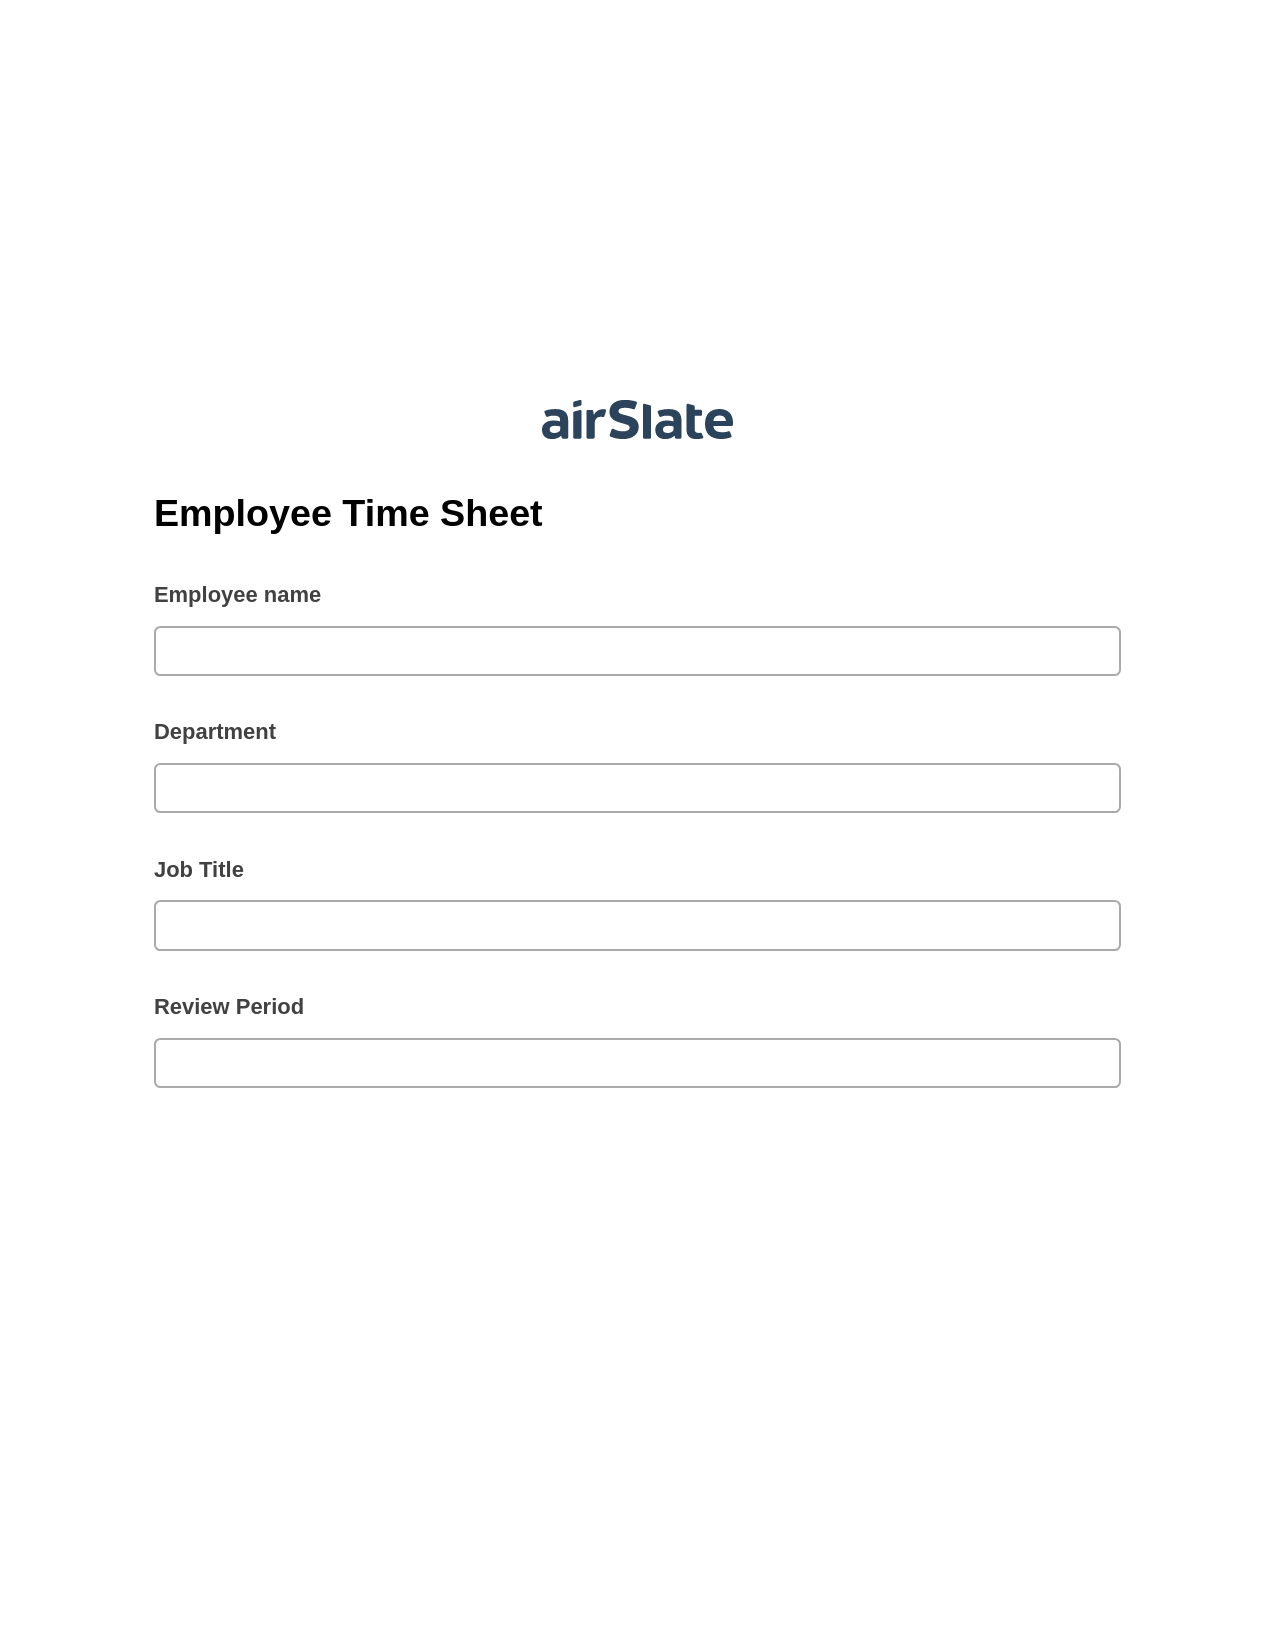 Multirole Employee Time Sheet Pre-fill Dropdowns from CSV file Bot, Email Notification Bot, Archive to Dropbox Bot